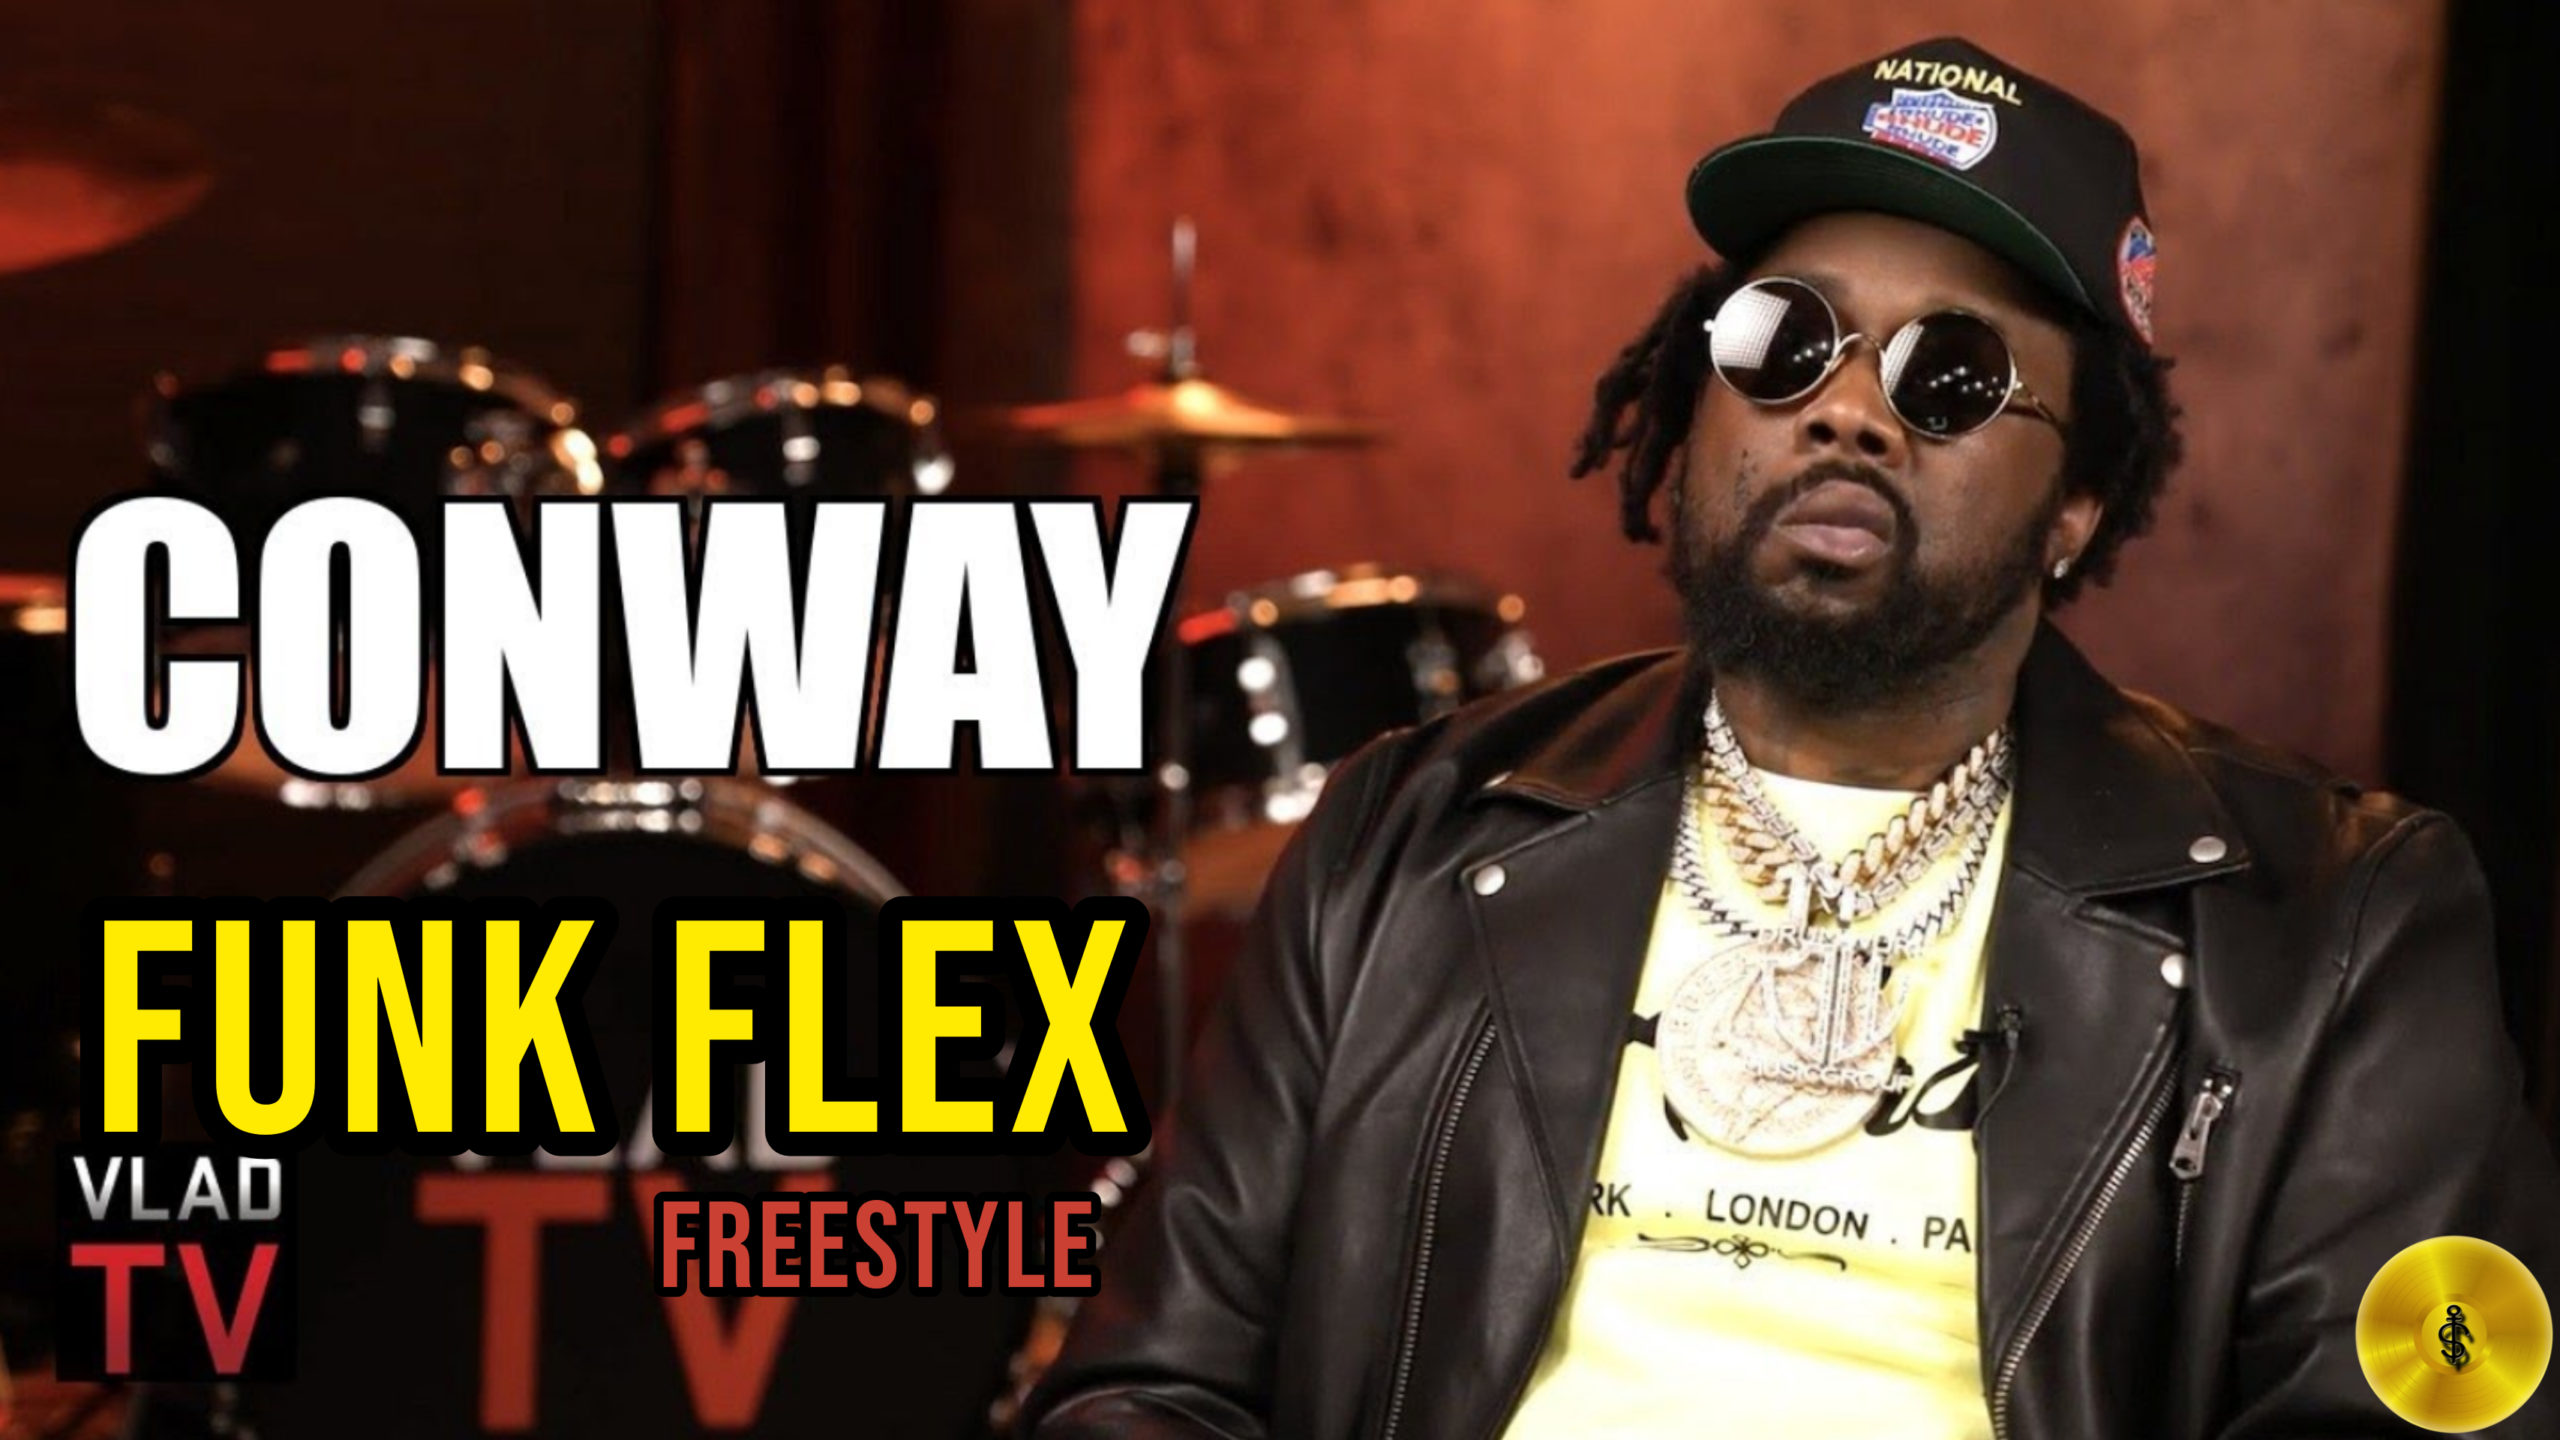 Funk Flex and Conway “Steve Smith Freestyle”